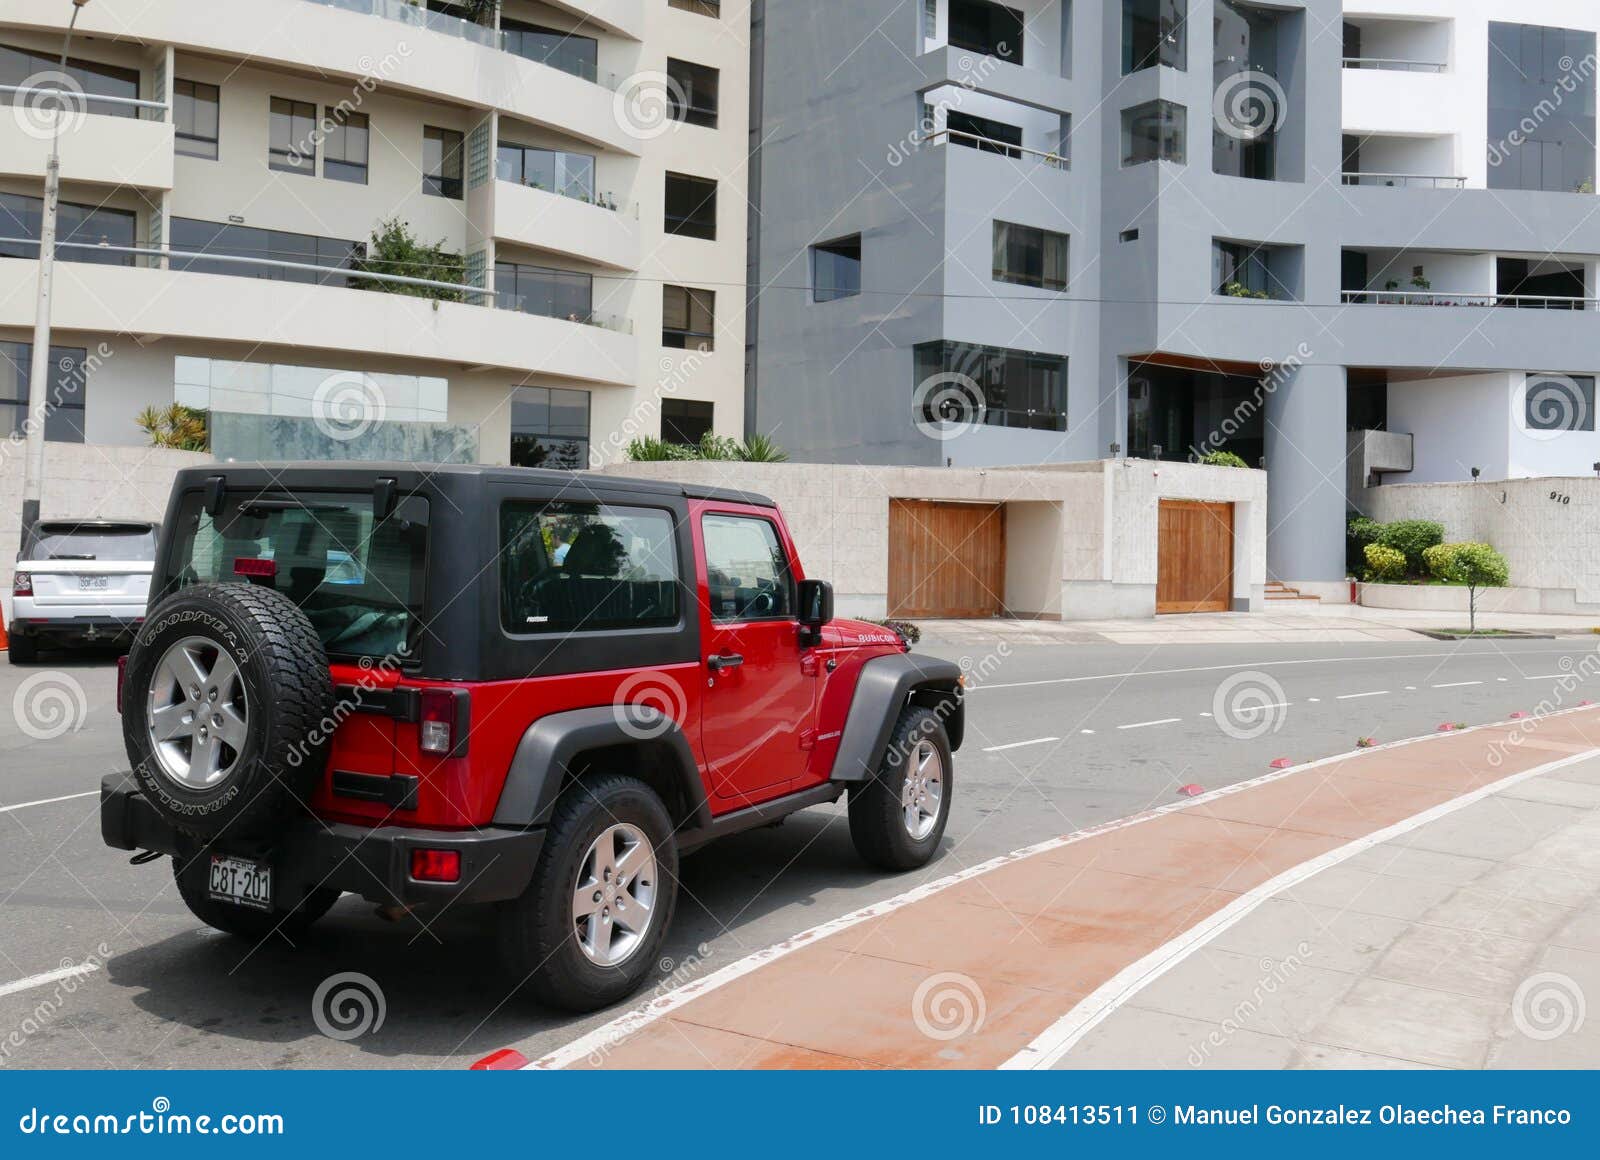 Red Jeep Wrangler Rubicon Parked in Miraflores, Lima Editorial Photo -  Image of outdoors, mint: 108413511